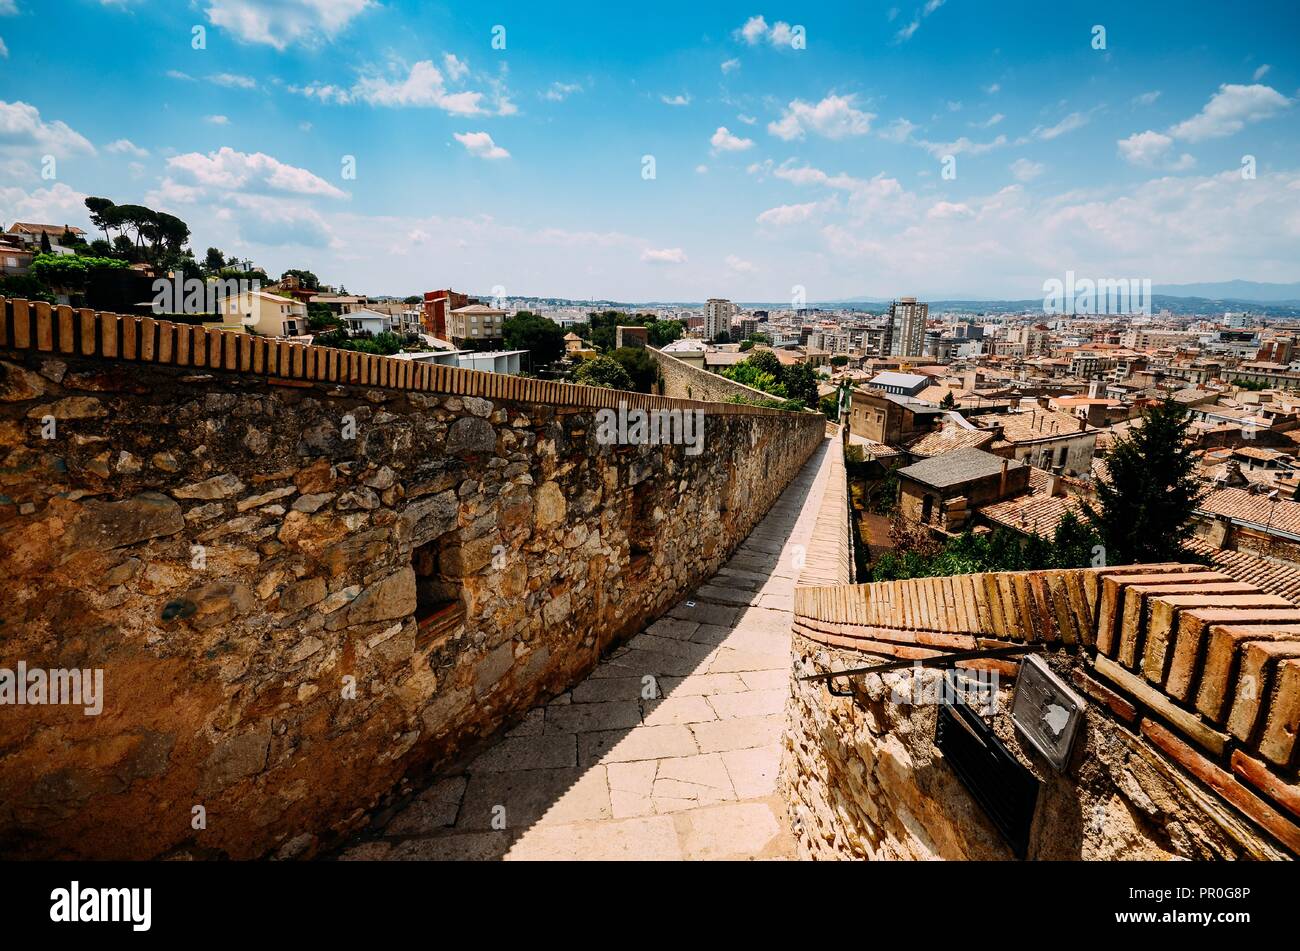 Venerable 9th century city walls with walkways, towers and scenic vantage points of Girona, Catalonia, Spain, Europe Stock Photo